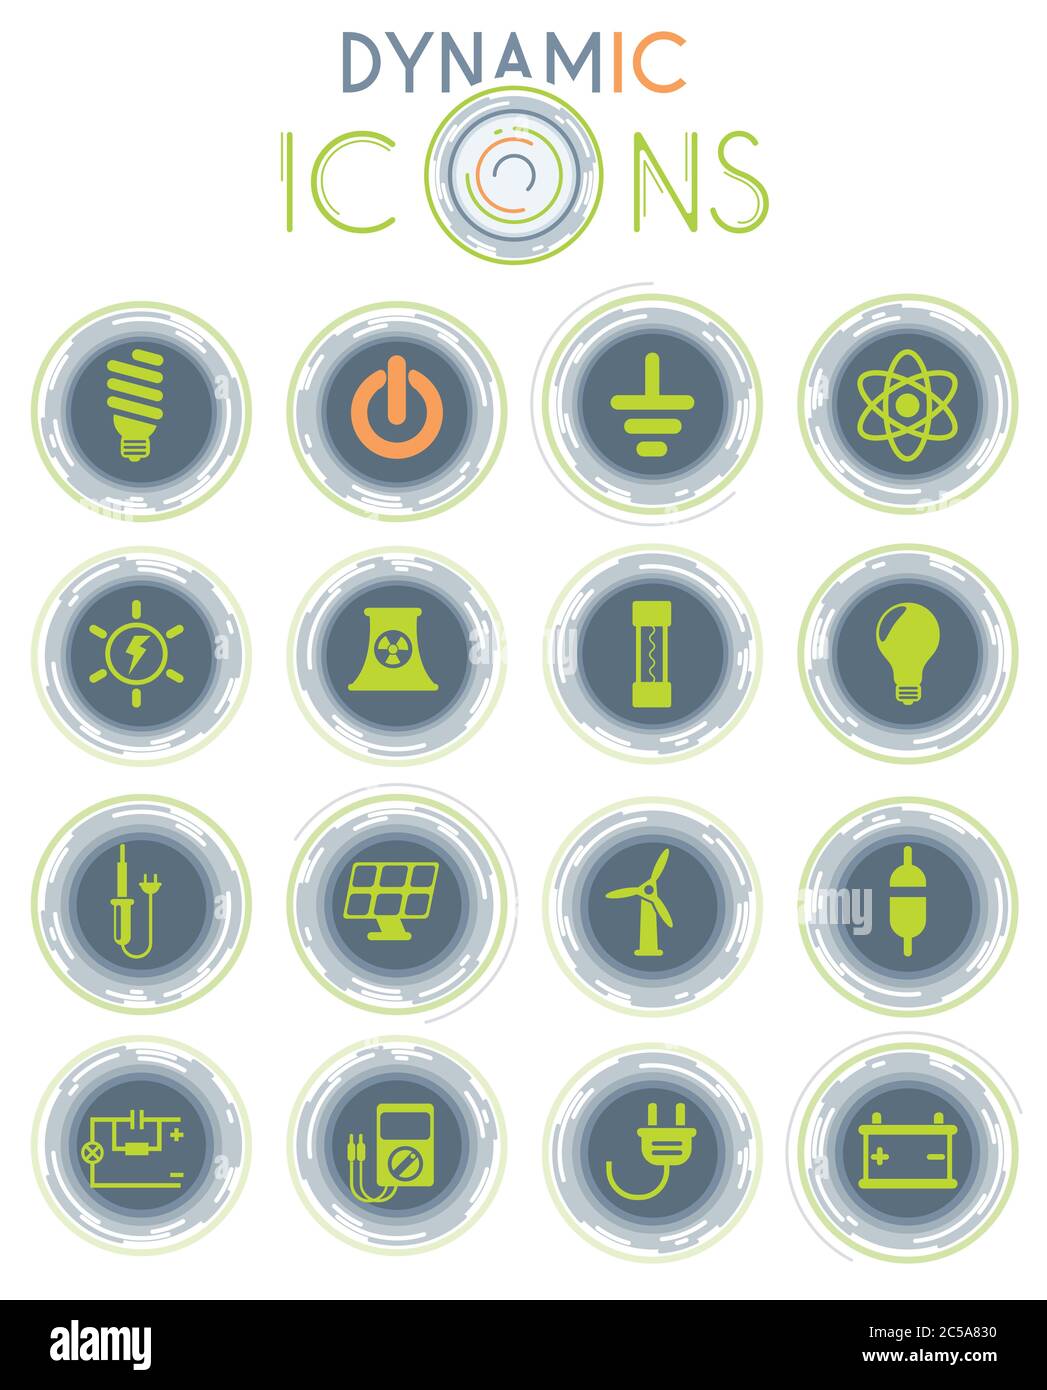 electricity dynamic icons Stock Vector